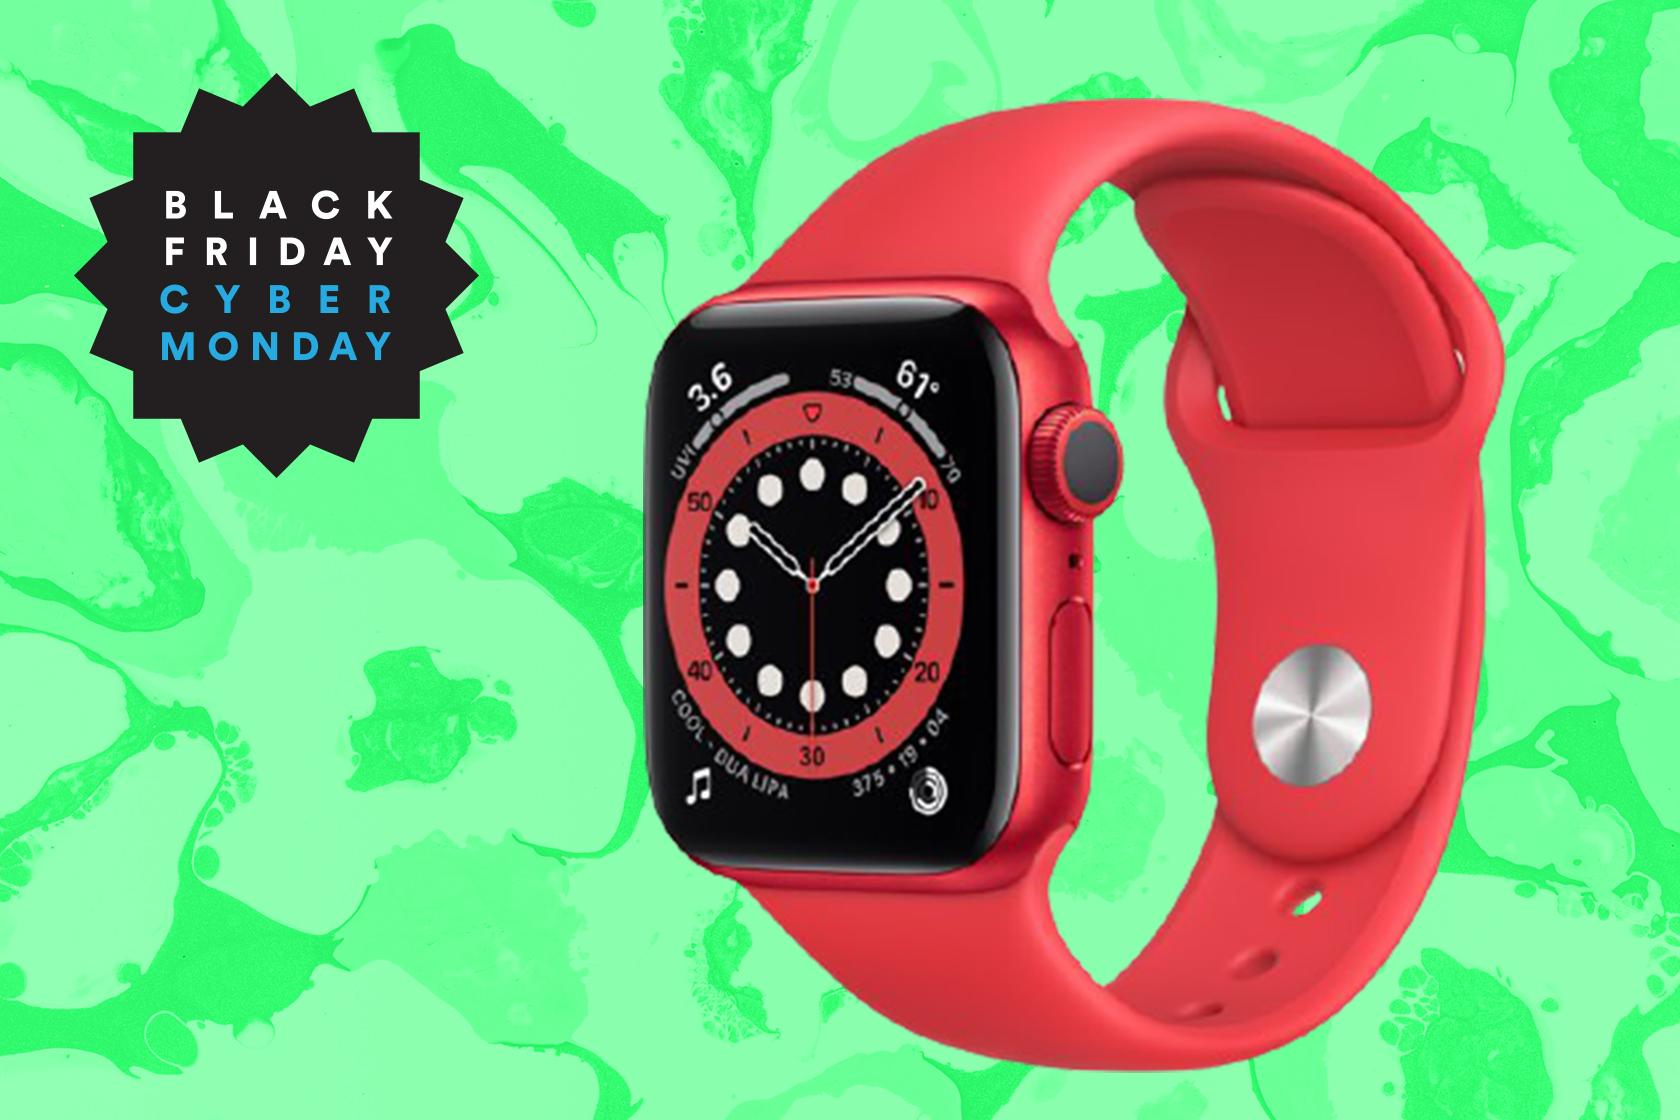 apple-watch-product-red-series-6-outlet-cheap-save-61-jlcatj-gob-mx